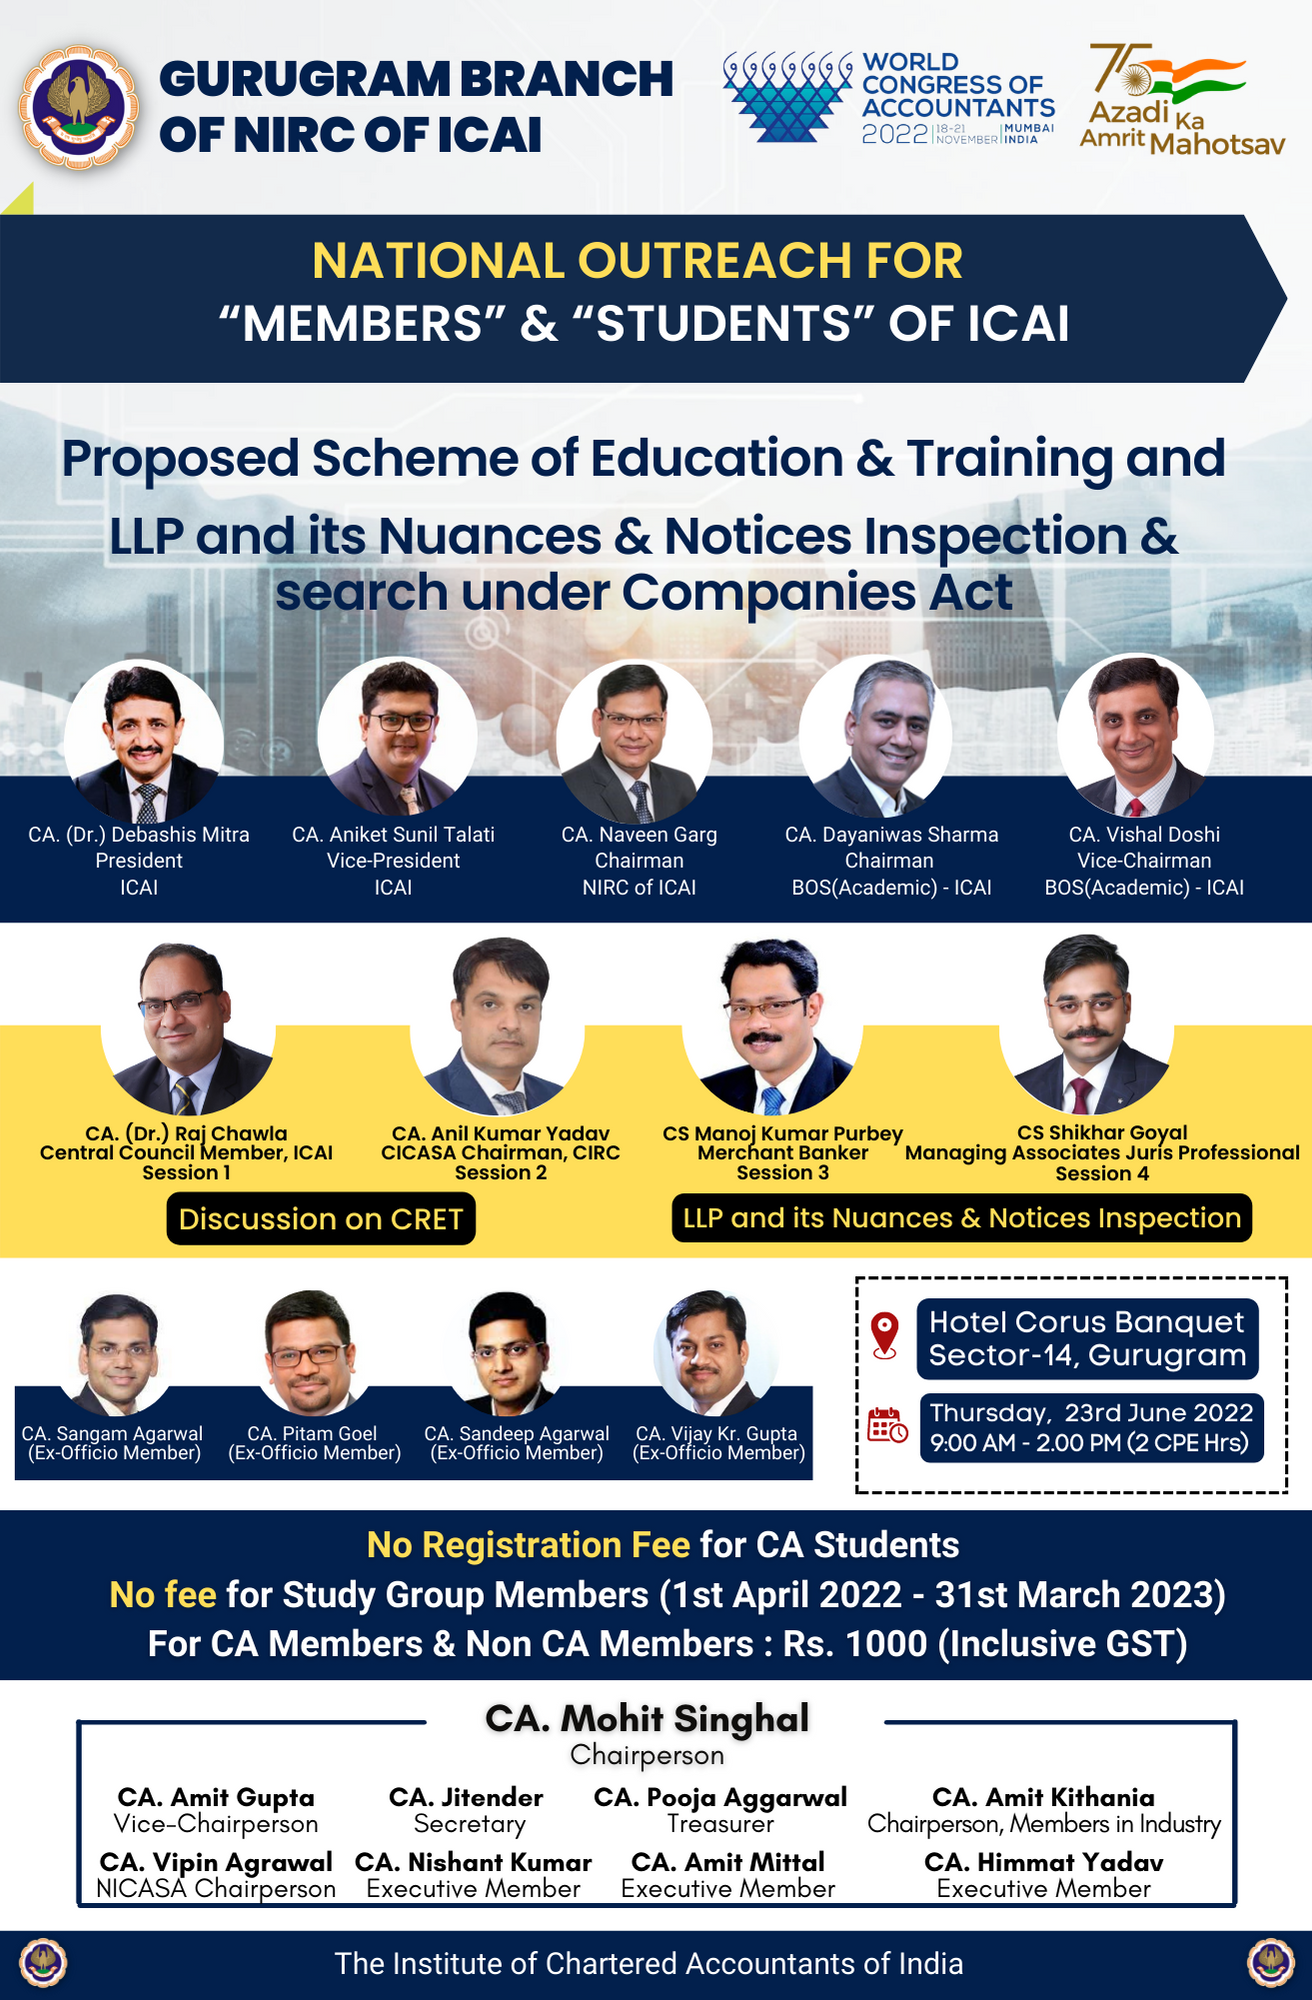 National Outreach for “Members” & “Students” of ICAI & Seminar on LLP and its Nuances & Notices Inspection & Search under Companies Act